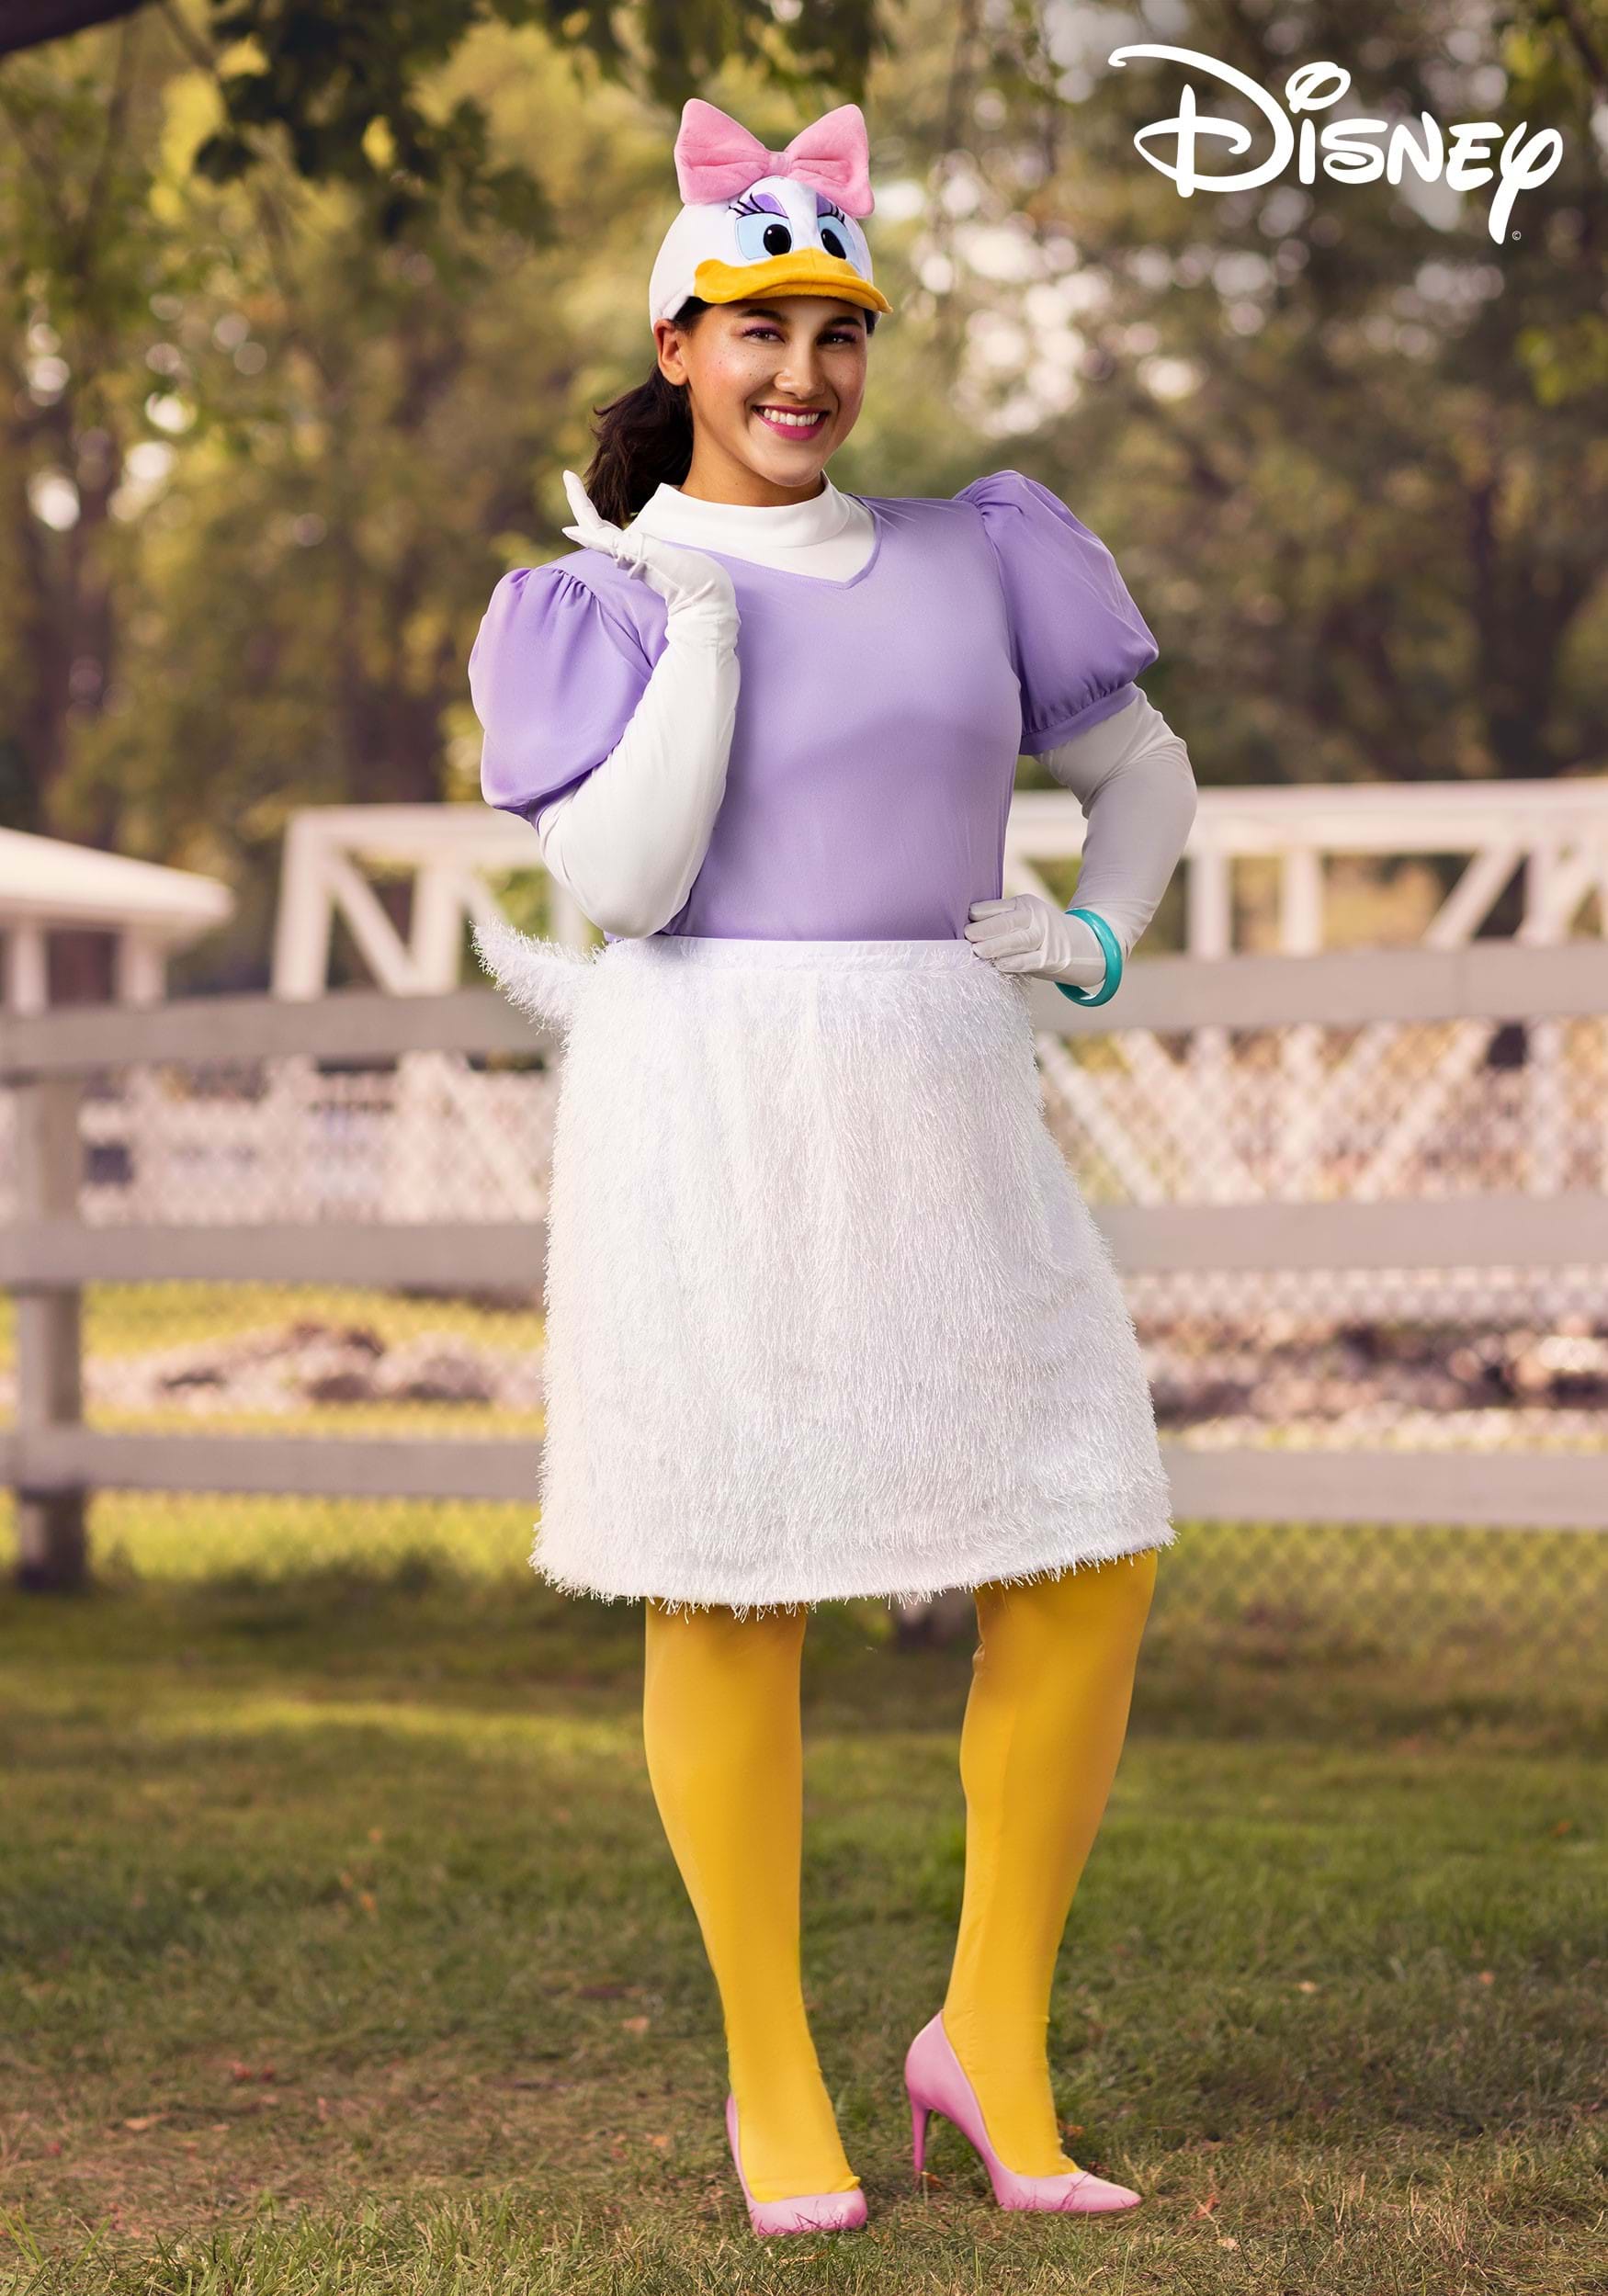 https://images.halloweencostumes.com/products/75647/1-1/plus-size-daisy-duck-costume.jpg